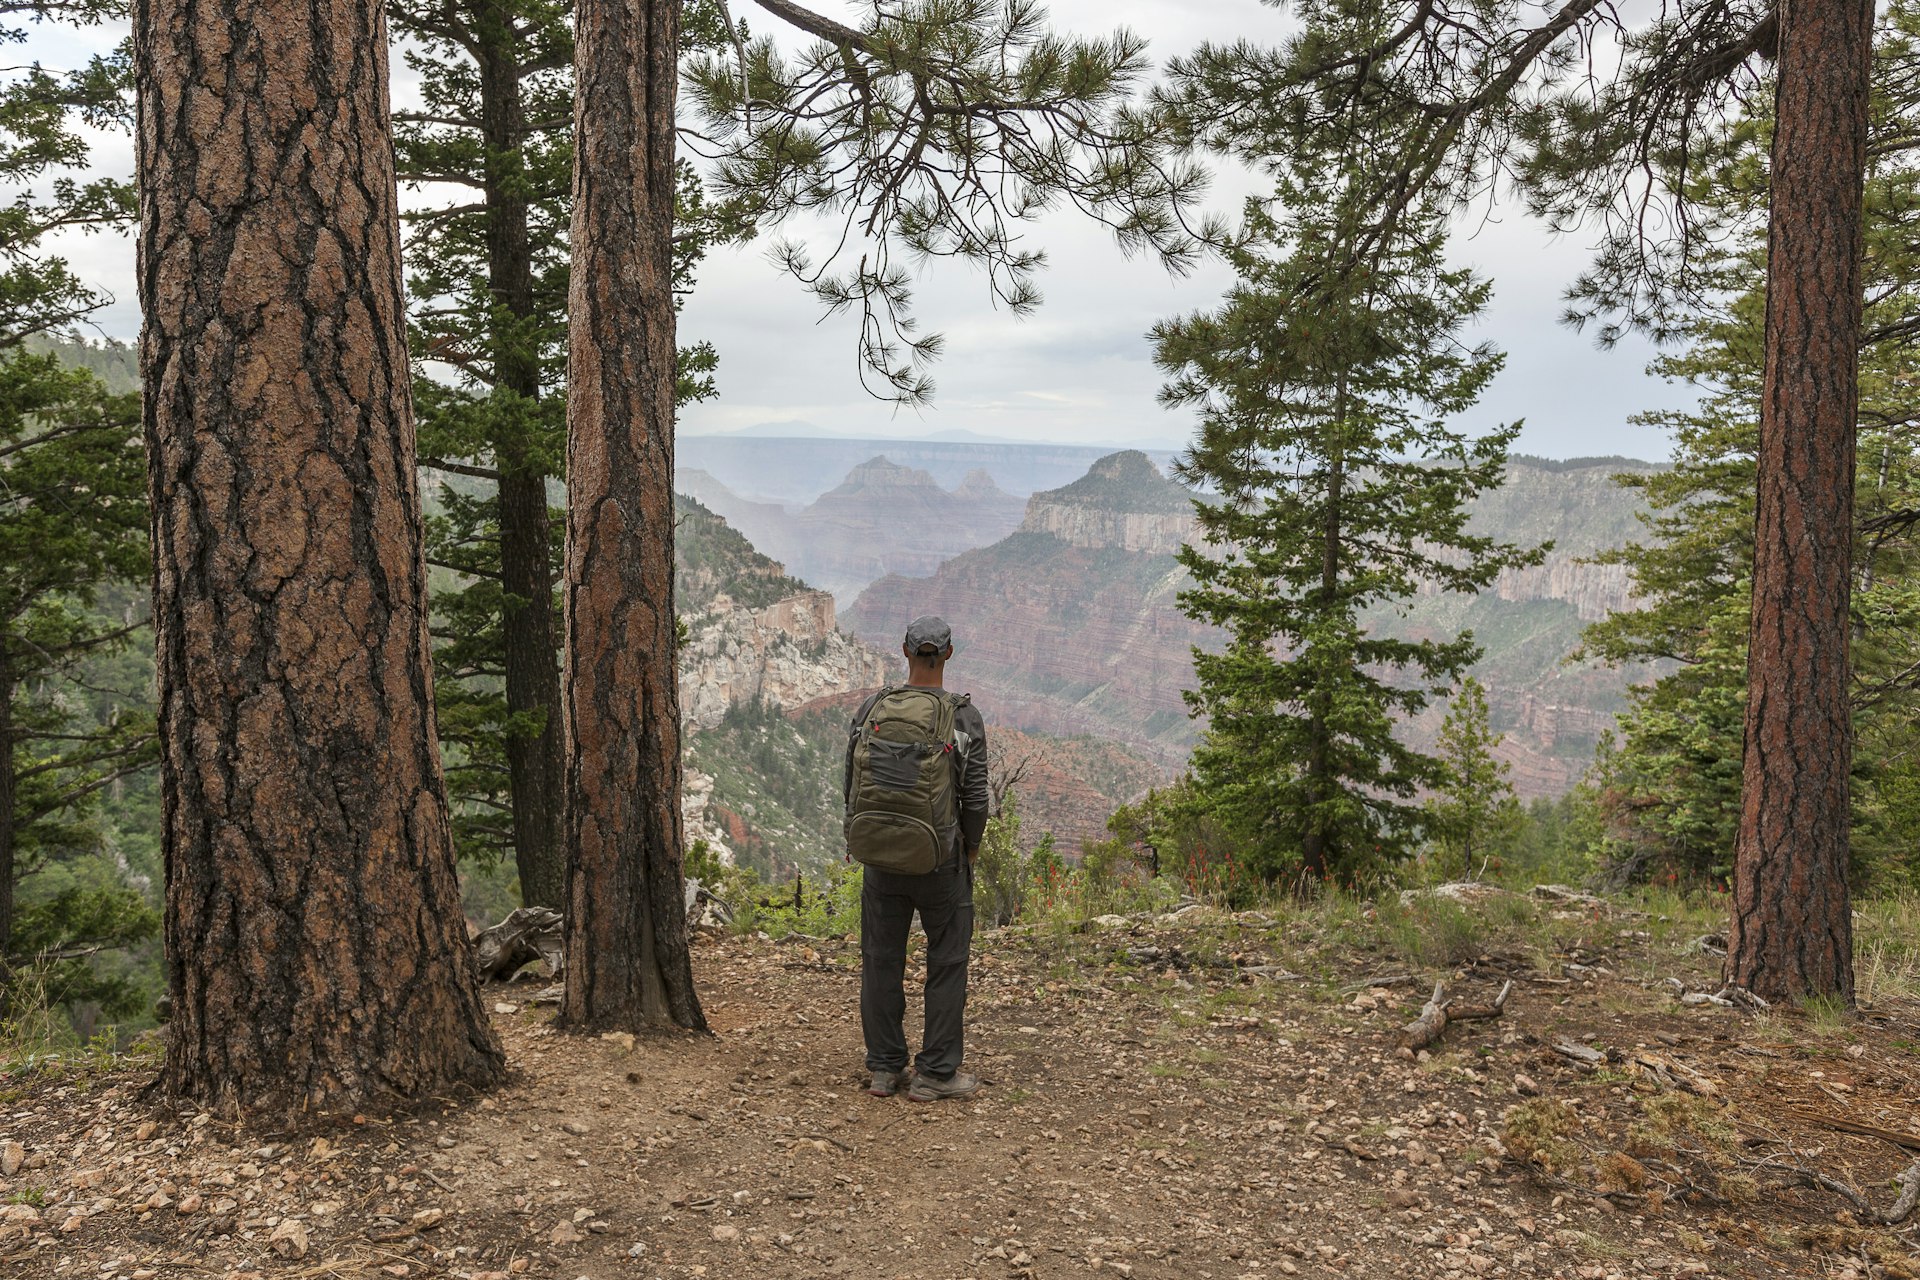 A man hiking the Widforss Trail in Grand Canyon looks out through the trees across the National Park